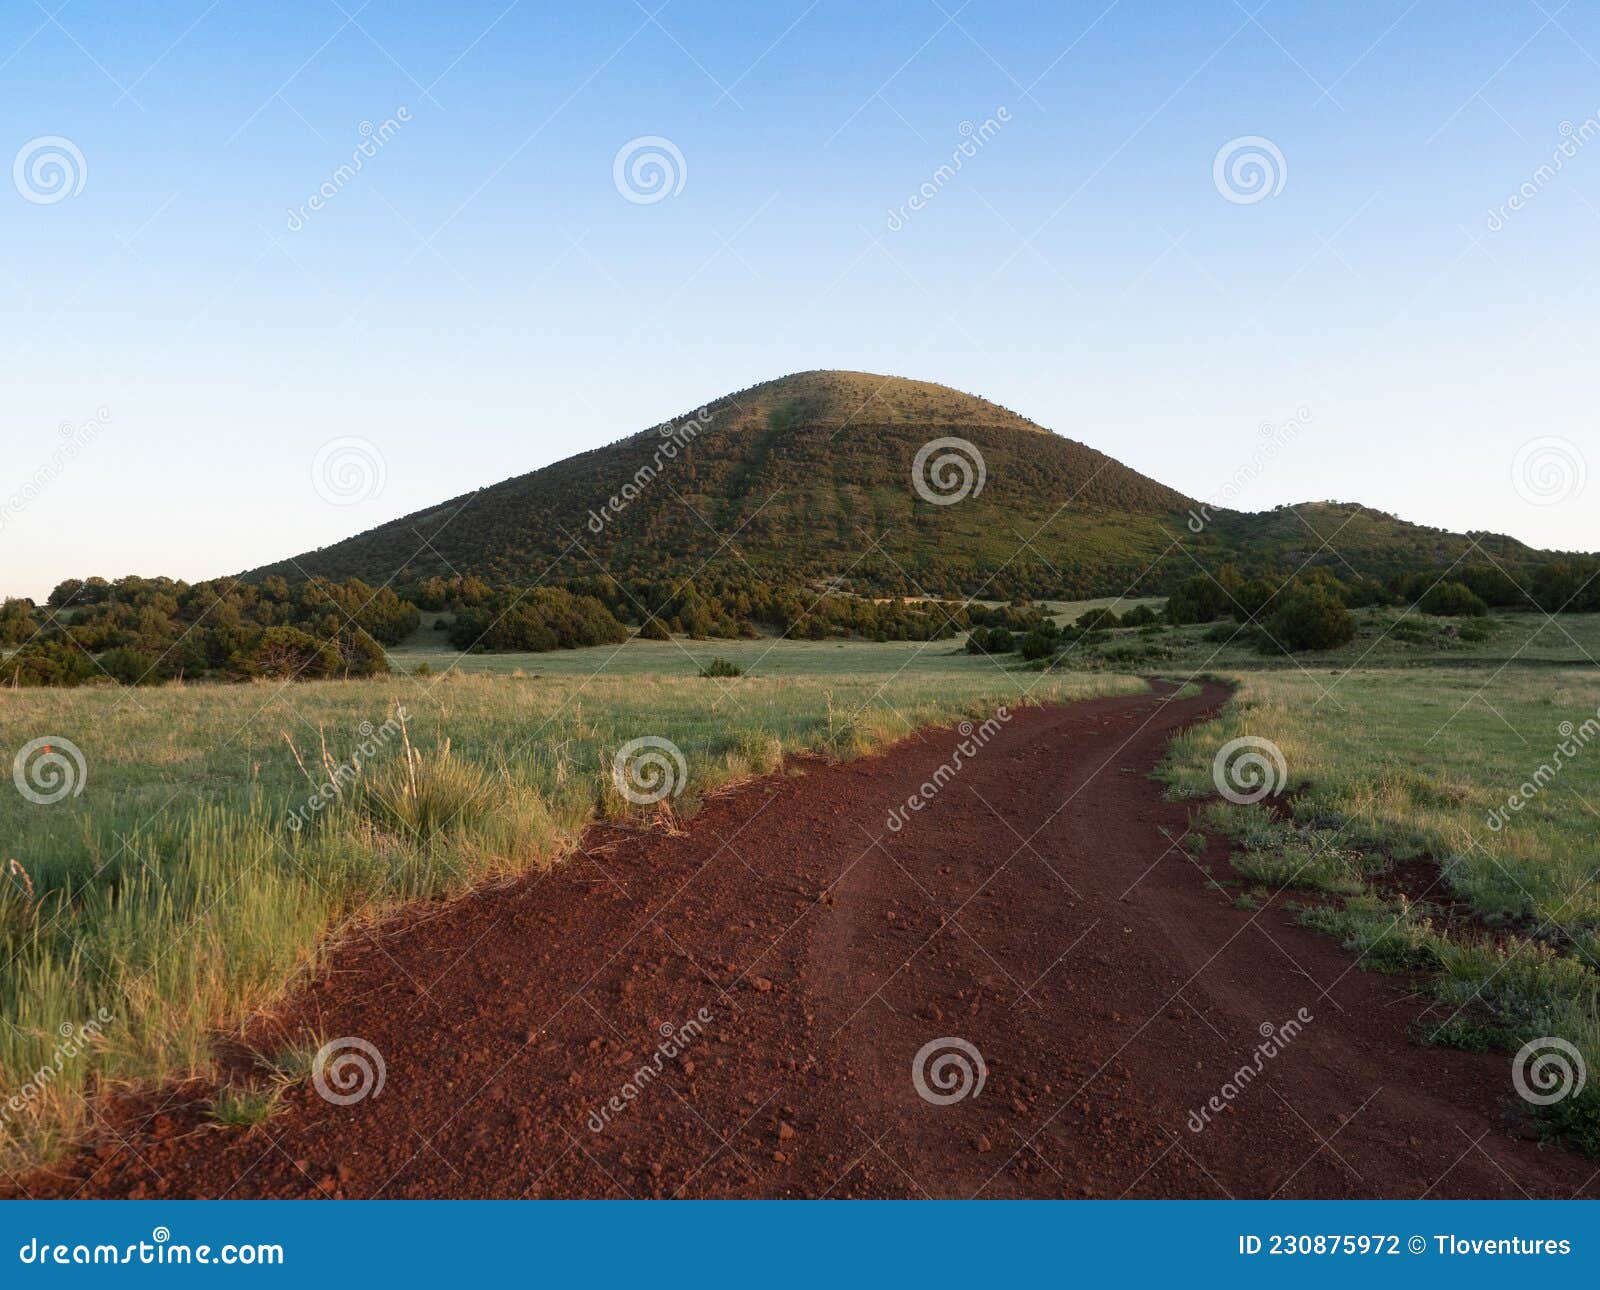 a red dirt road leading to capulin volcano in new mexico